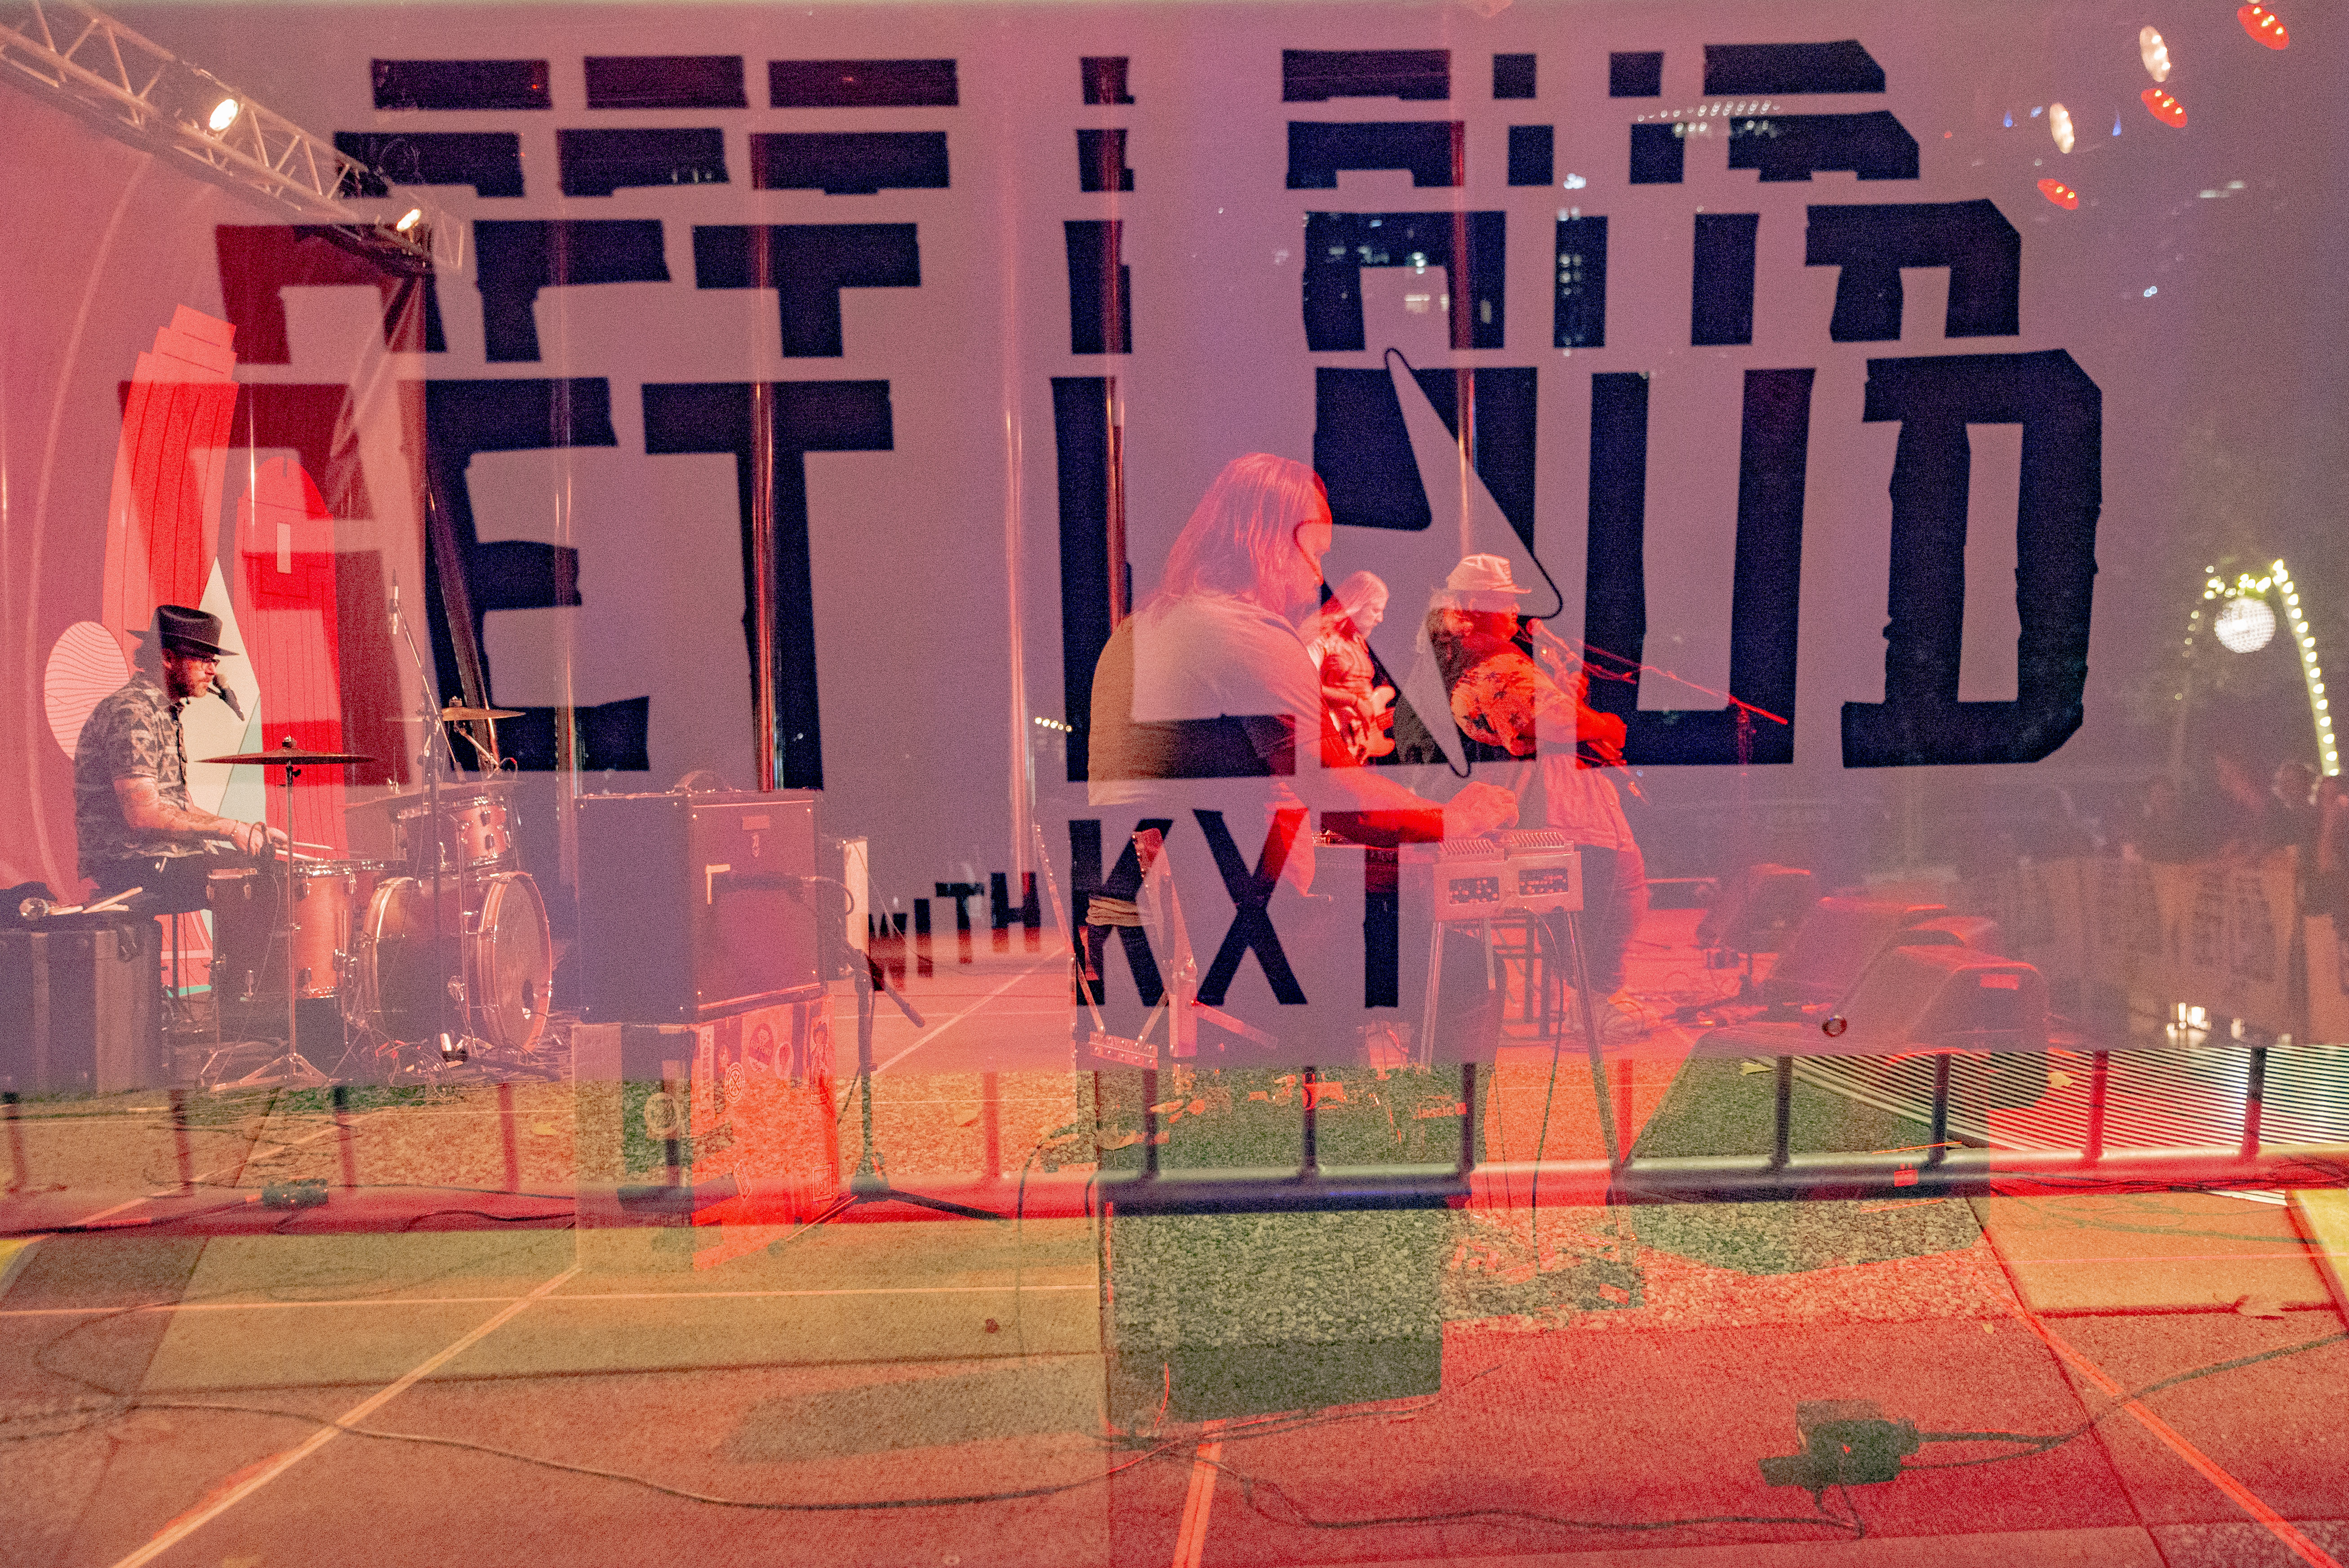 A double exposure image with a band and event banner 